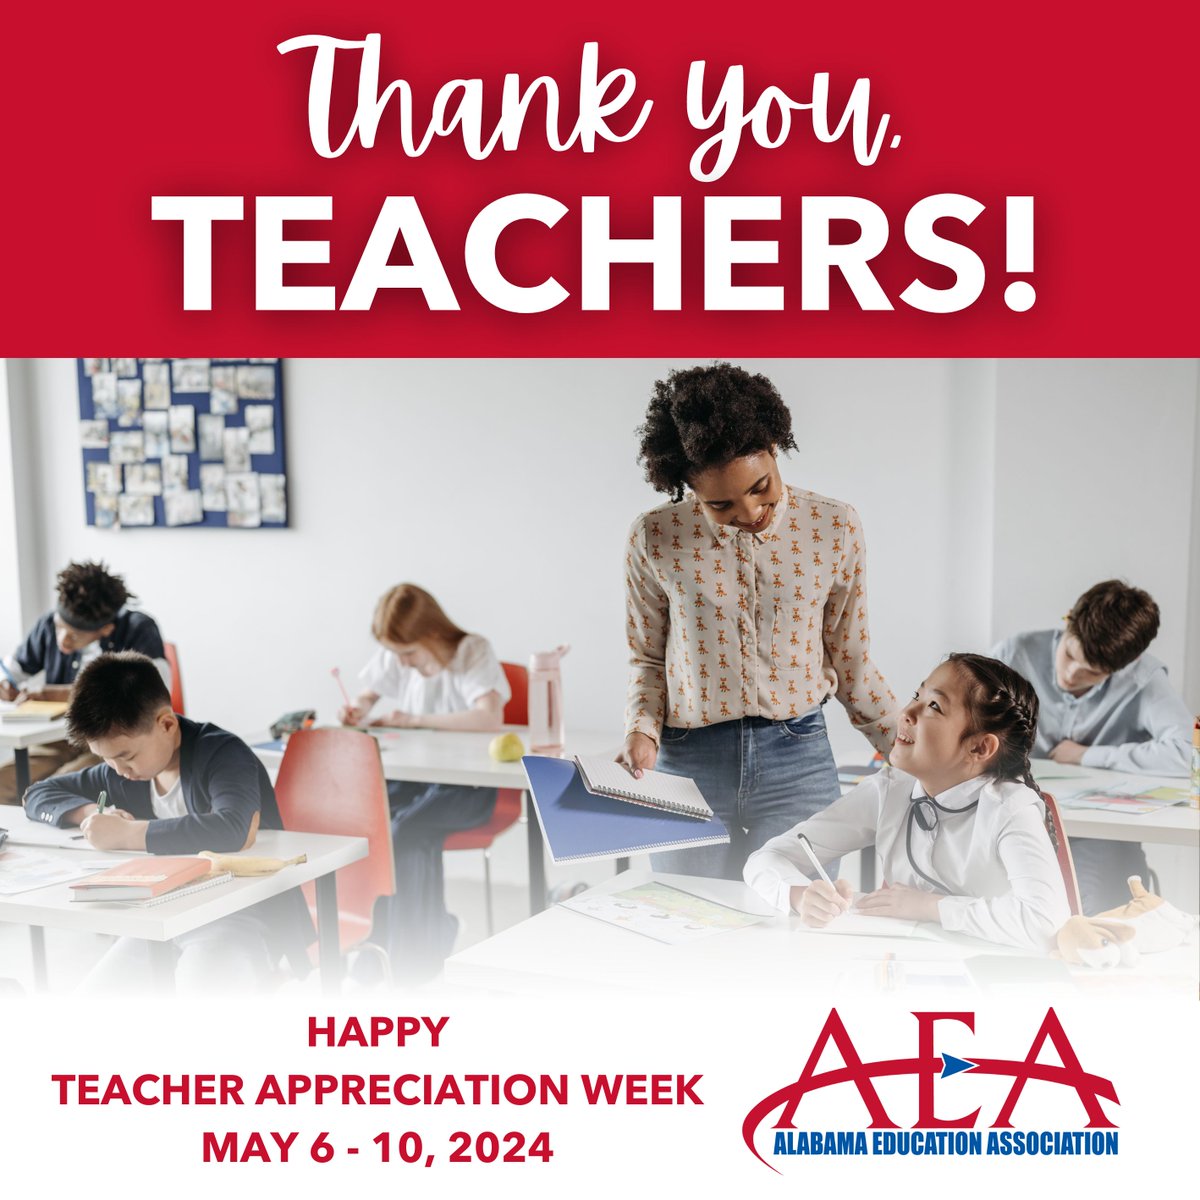 Happy #TeacherAppreciationWeek to all teachers! 🍎 📚 We thank you for always giving our students kindness, support, and the tools they need to succeed. Share this post and remember to #ThankATeacher this week! #myAEA